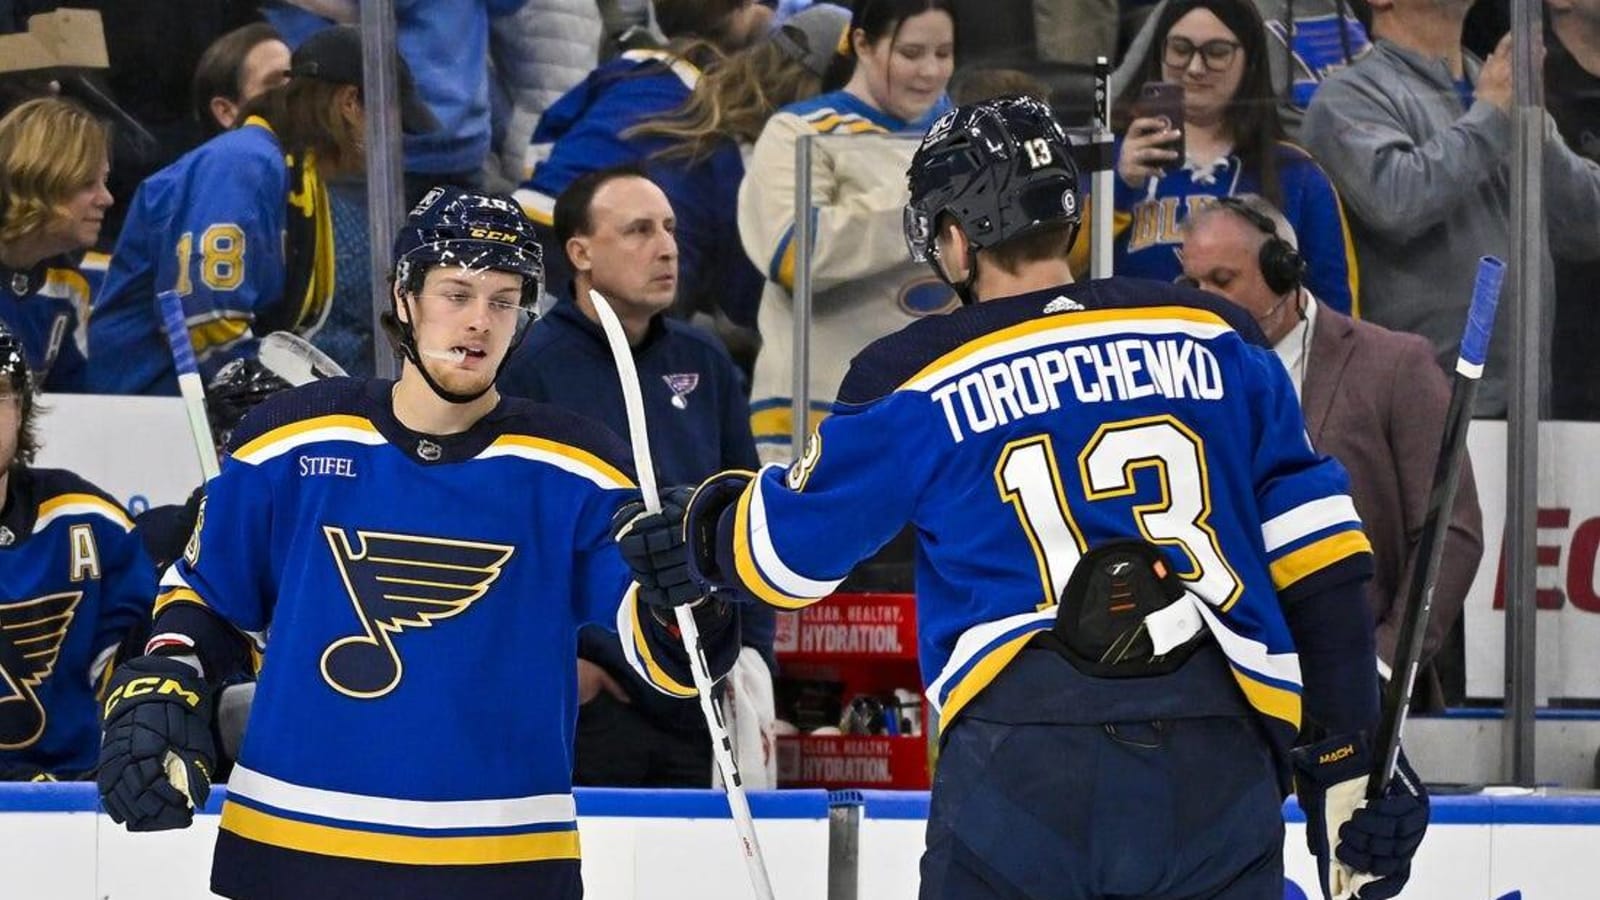 Blues turning to youngsters as time runs out, face Blackhawks next